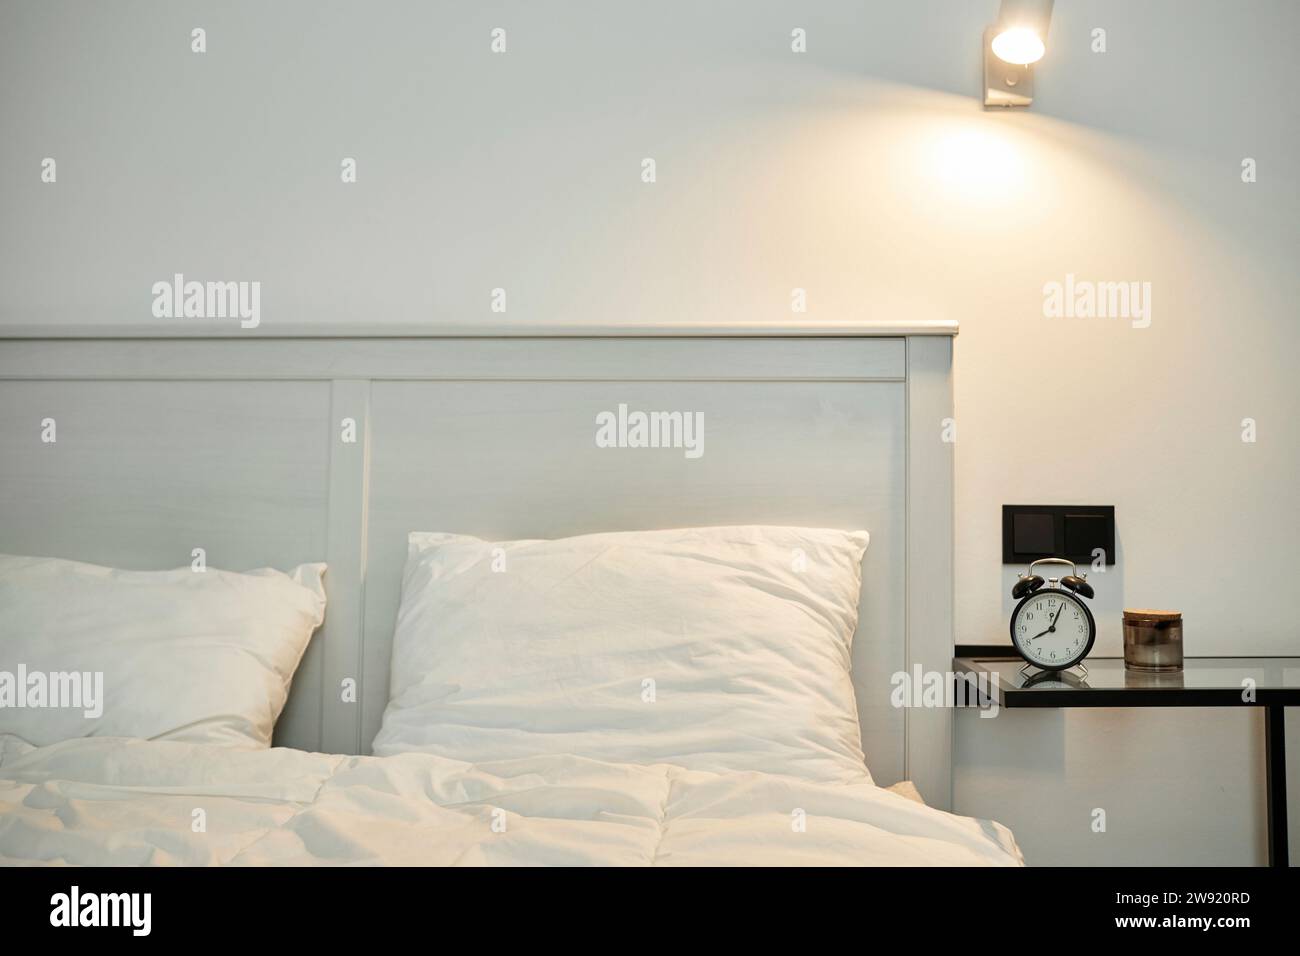 Bedroom interior, bed with white linen and bedside table with alarm clock on it Stock Photo